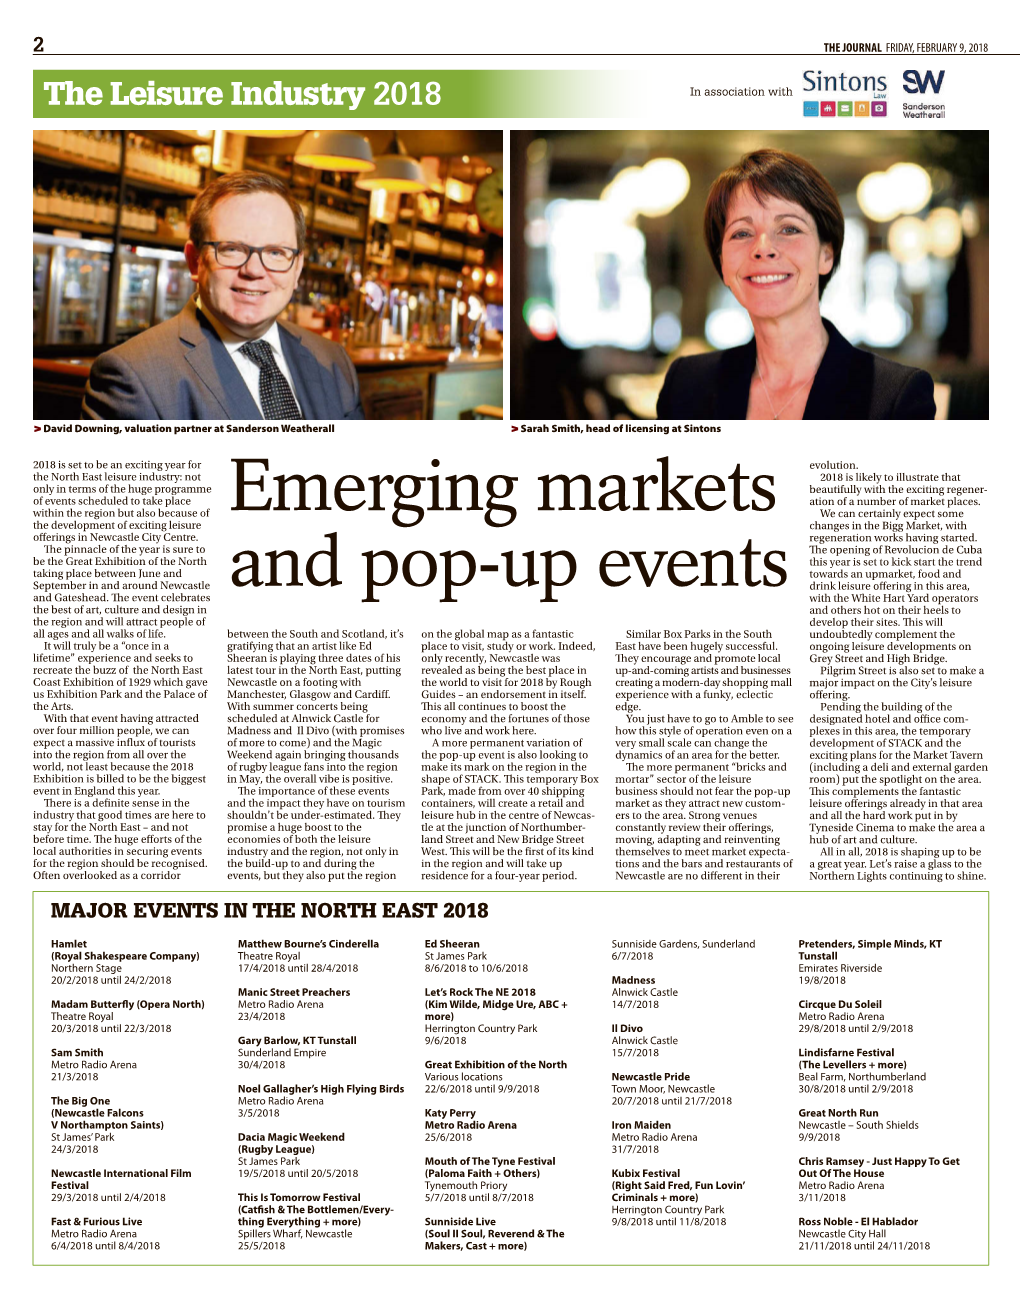 Emerging Markets and Pop-Up Events